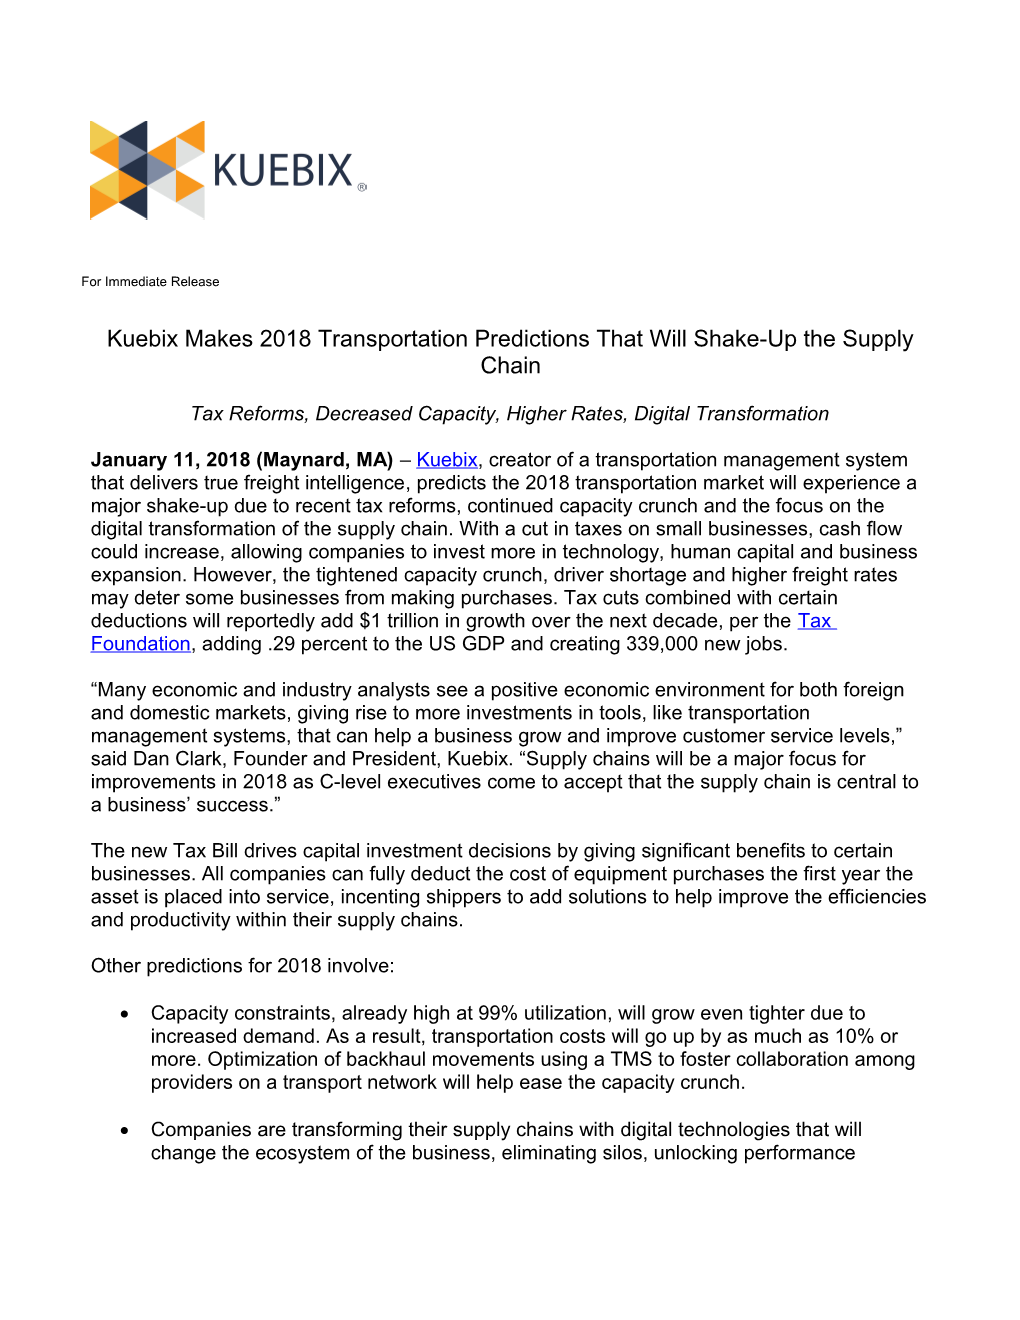 Kuebix Makes 2018 Transportation Predictions That Will Shake-Up the Supply Chain